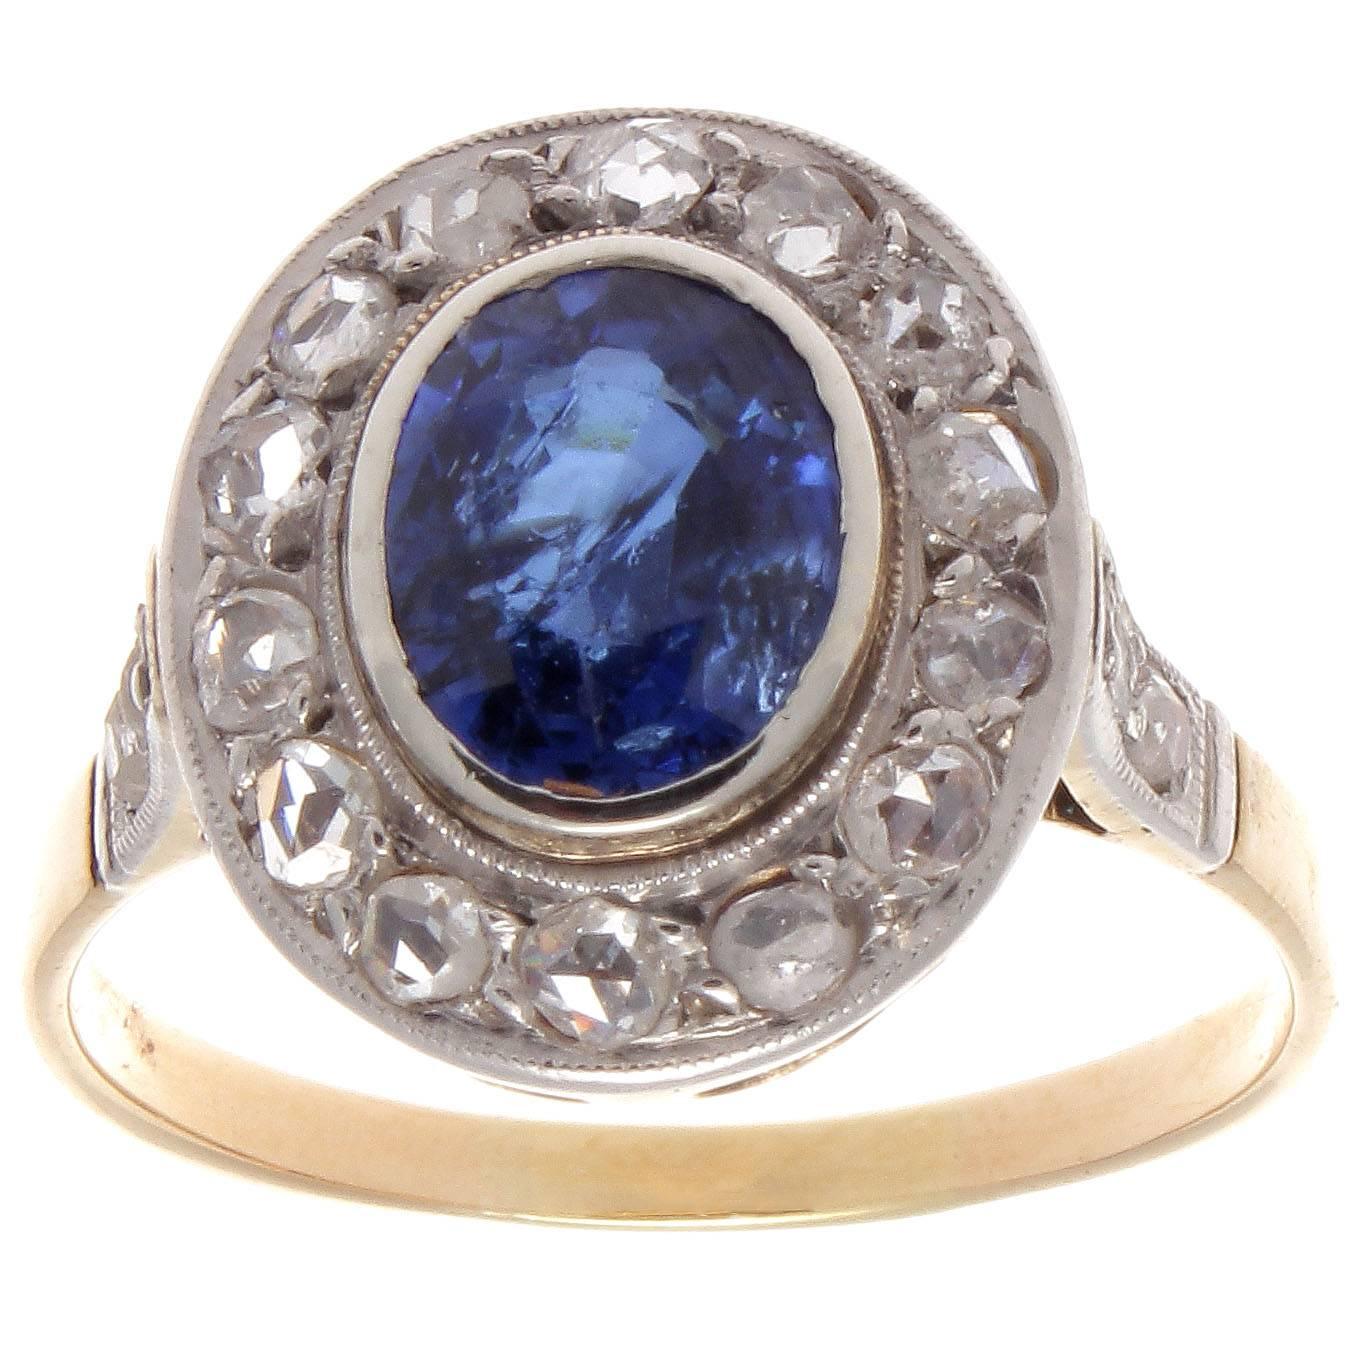 A classic combination of color infused with the forever in style halo ring that has been popular since the 19th century. Featuring a deep royal blue oval cut sapphire that weighs approximately 1.65 carats and is surrounded by a halo of 18 ancient